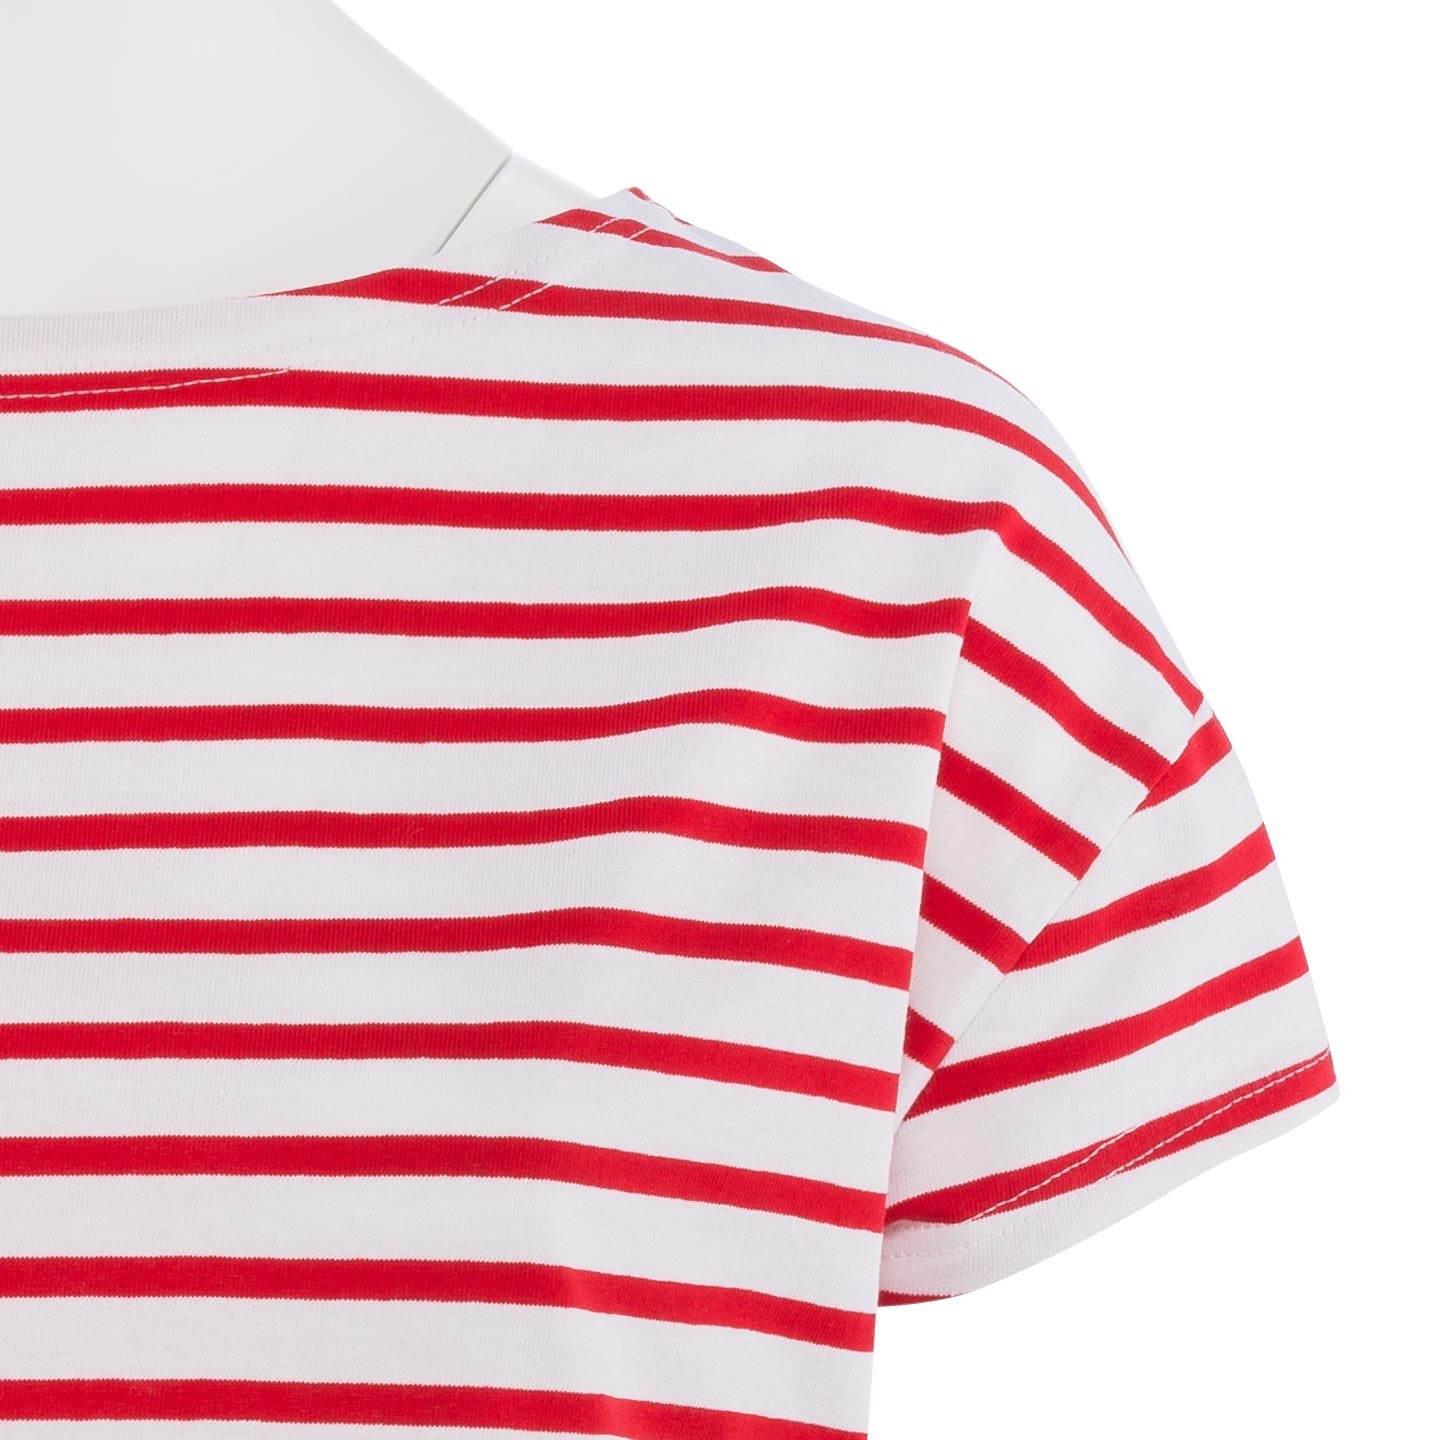 Short striped shirt White / Red, unisex made in France Orcival